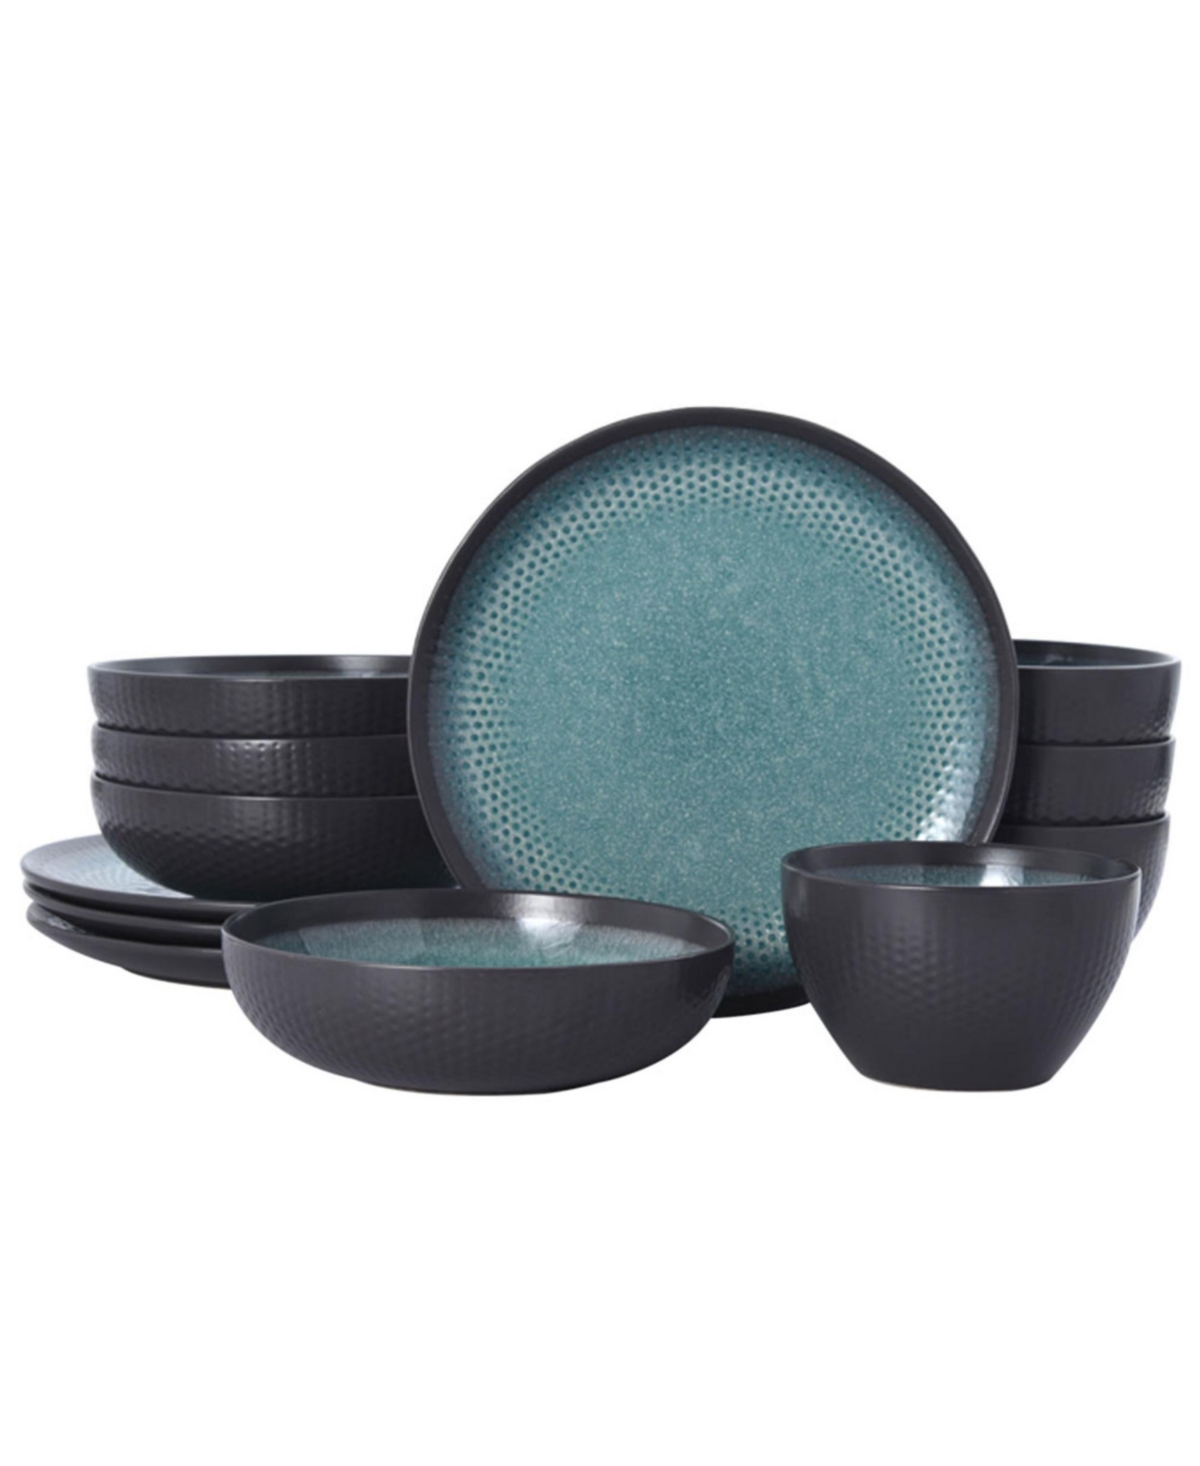 maddox 12 pc dinnerware set, service for 4 - Teal